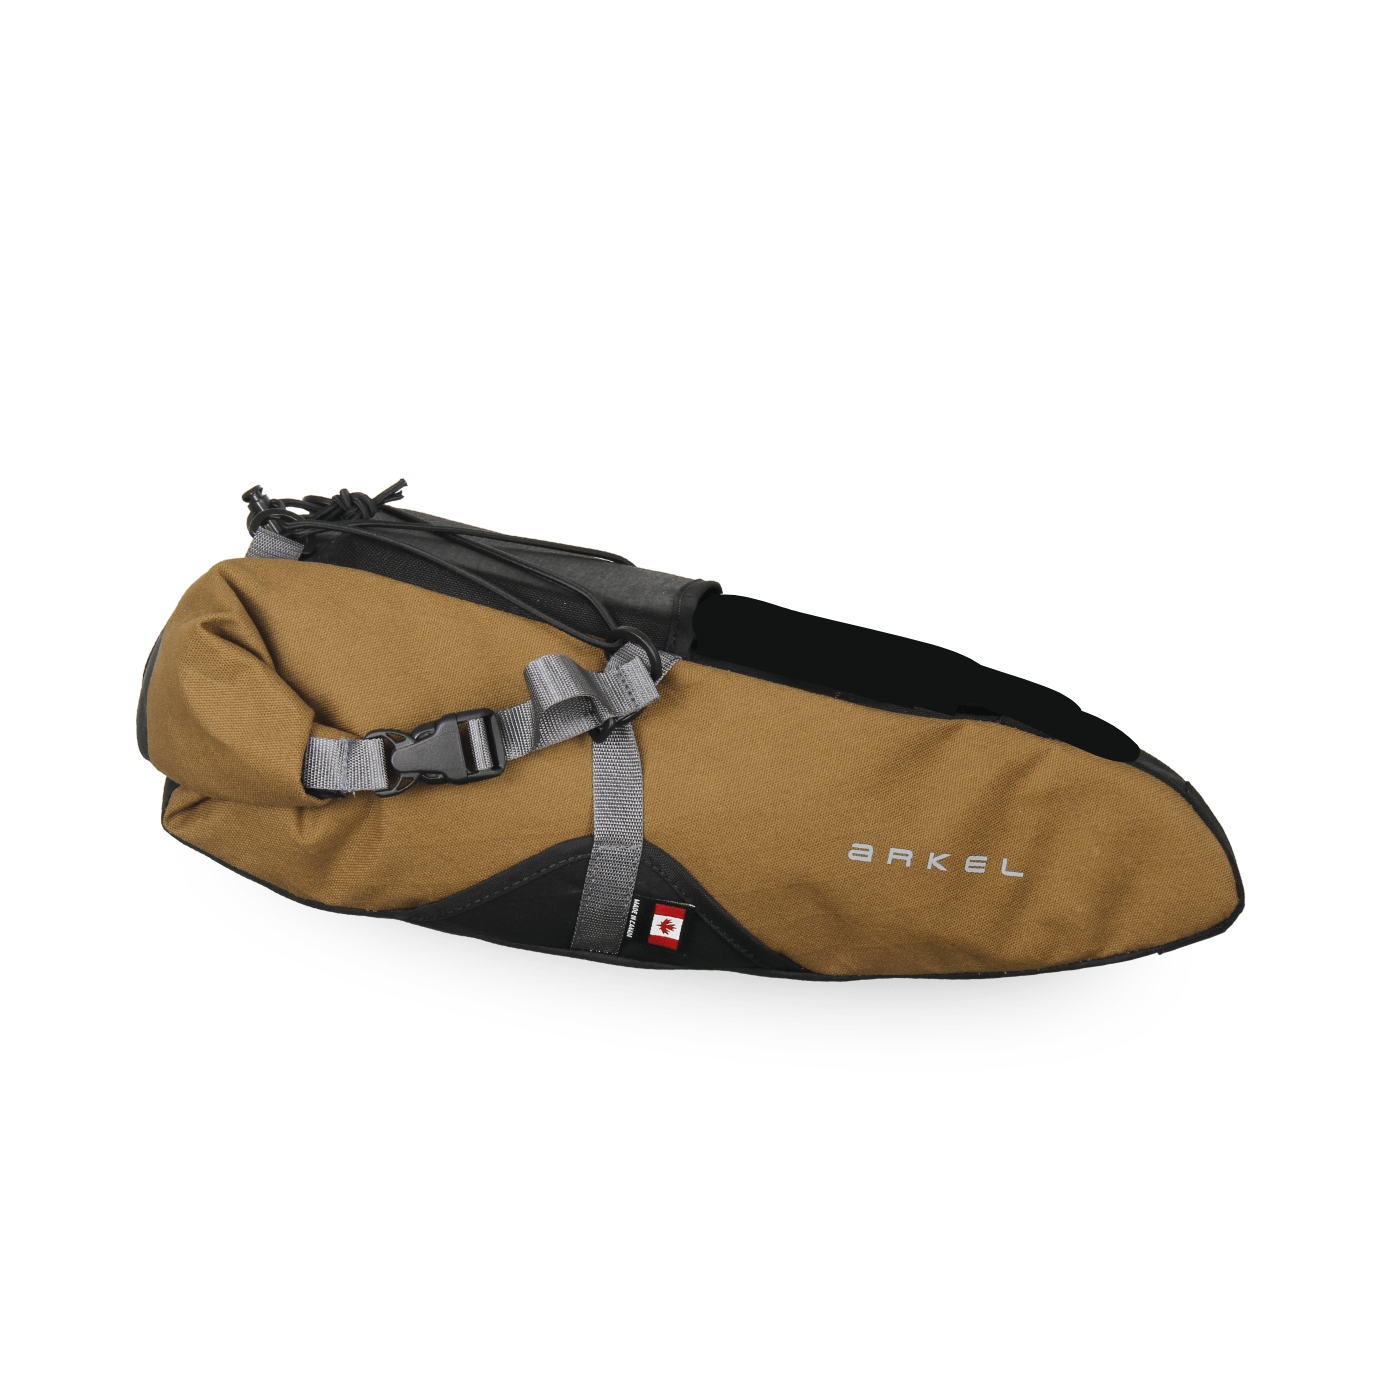 Seatpacker Bag - WITHOUT Hanger